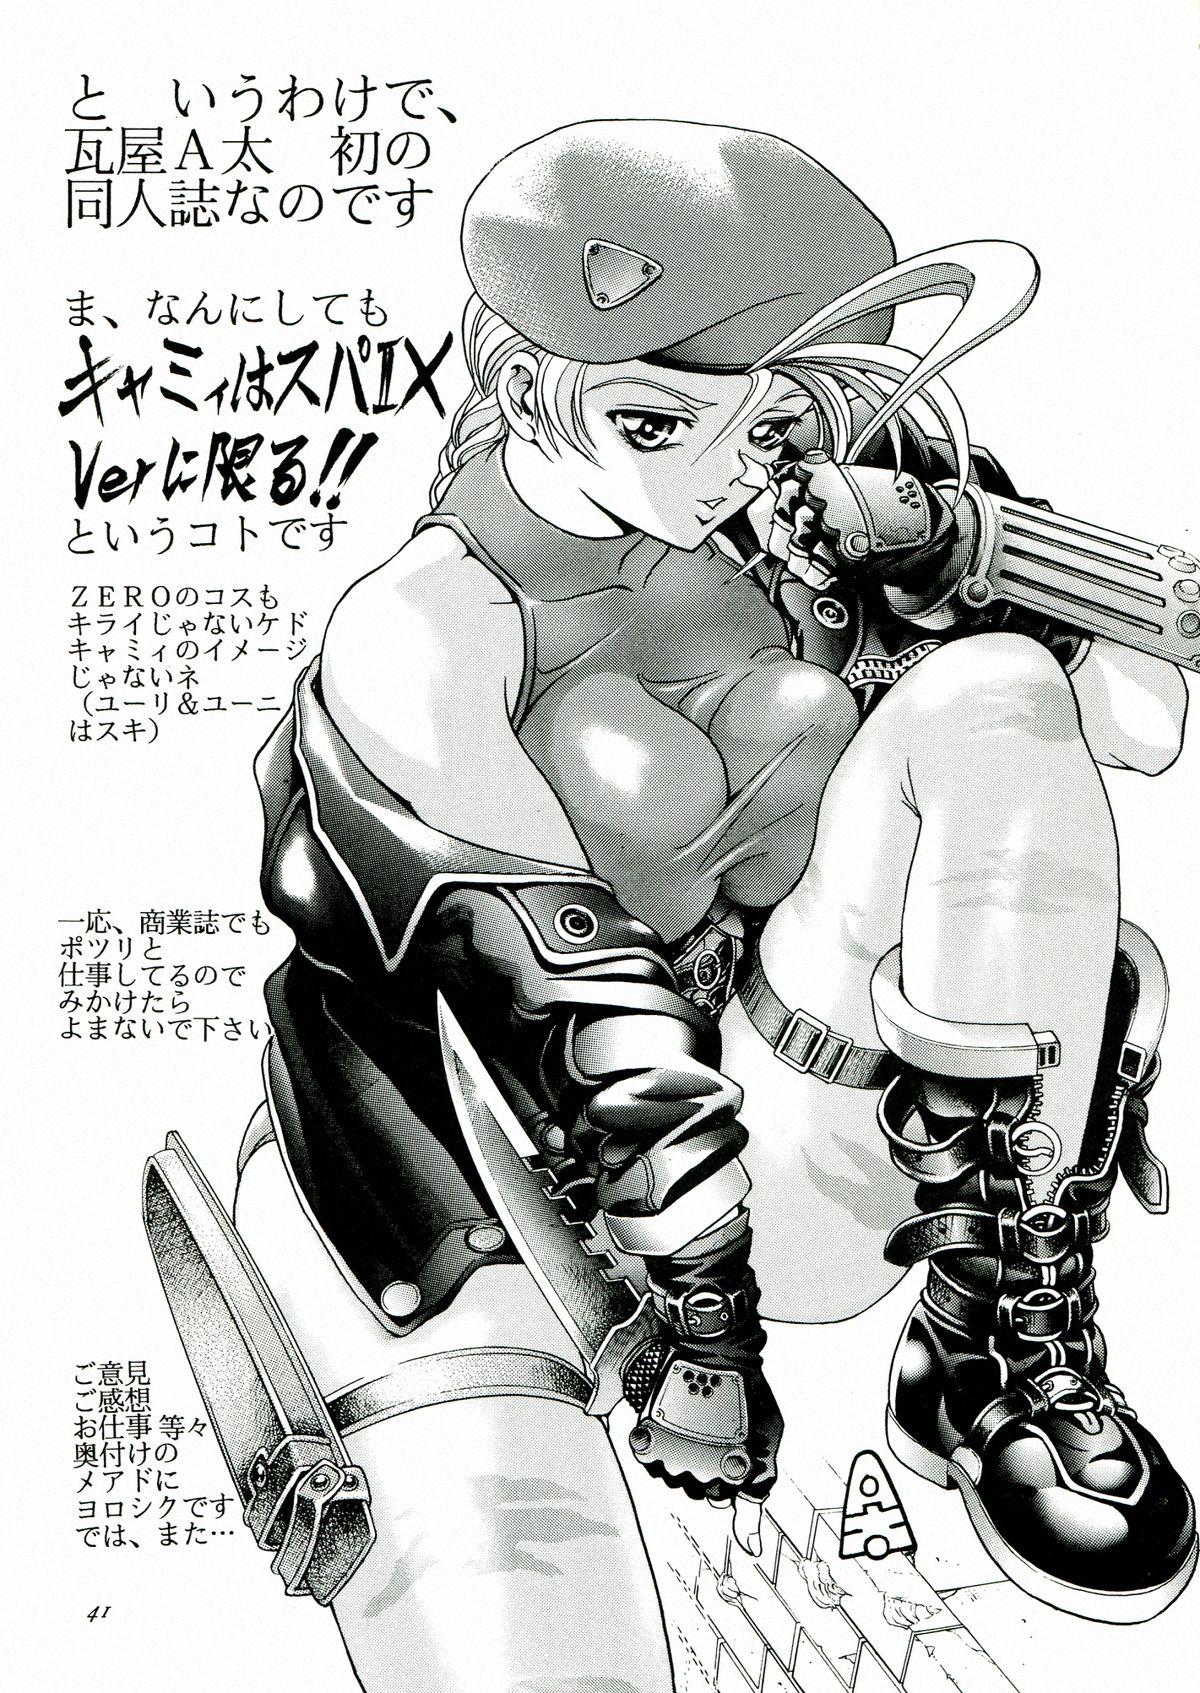 Scissoring Kawaraya Honpo vol. 1 - Street fighter King of fighters Slapping - Page 41